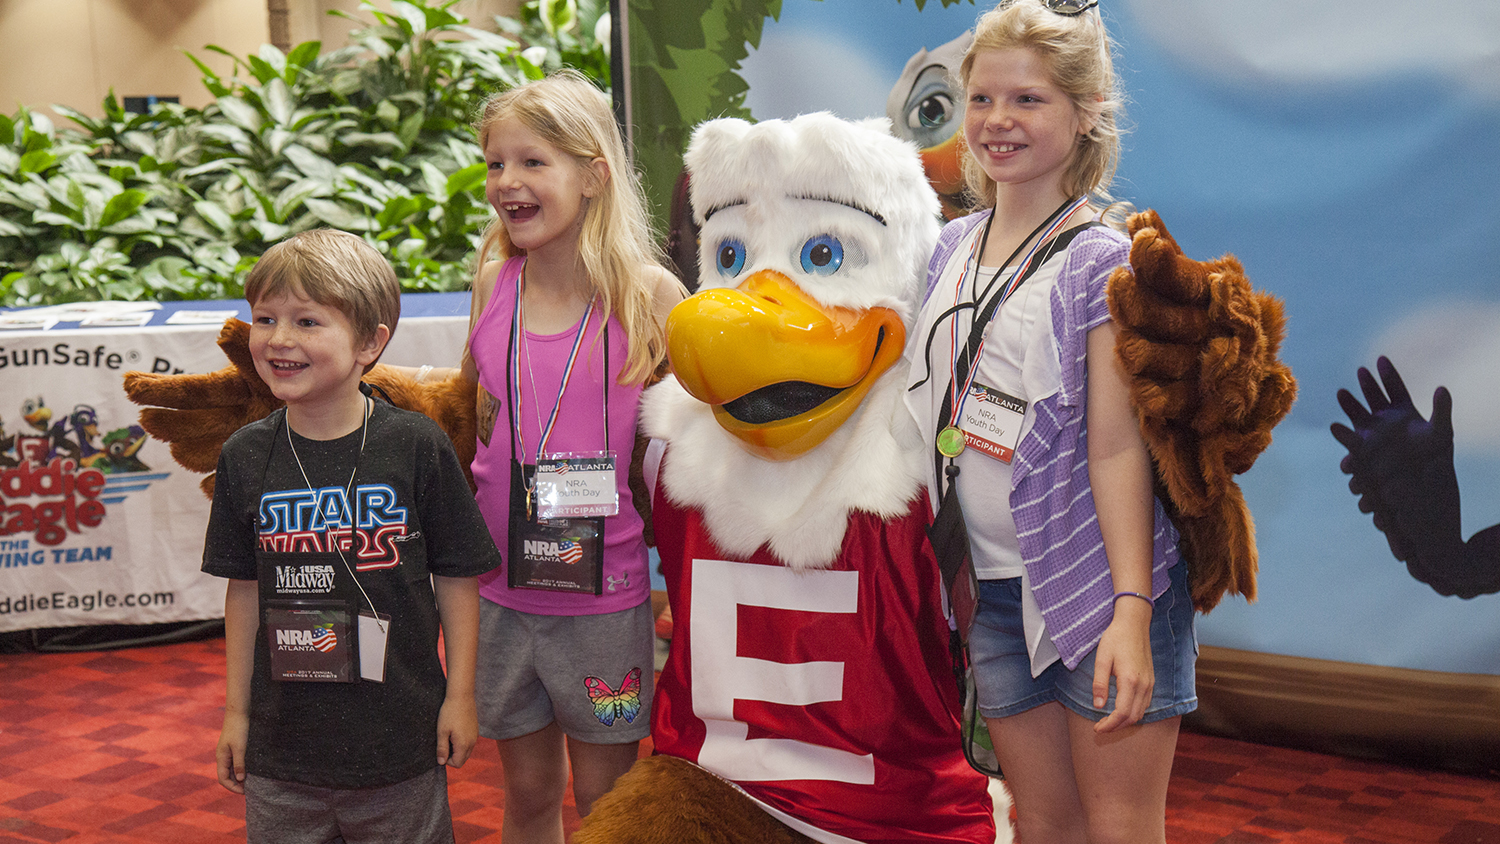 Celebrate with Eddie Eagle at NRA Annual Meetings!